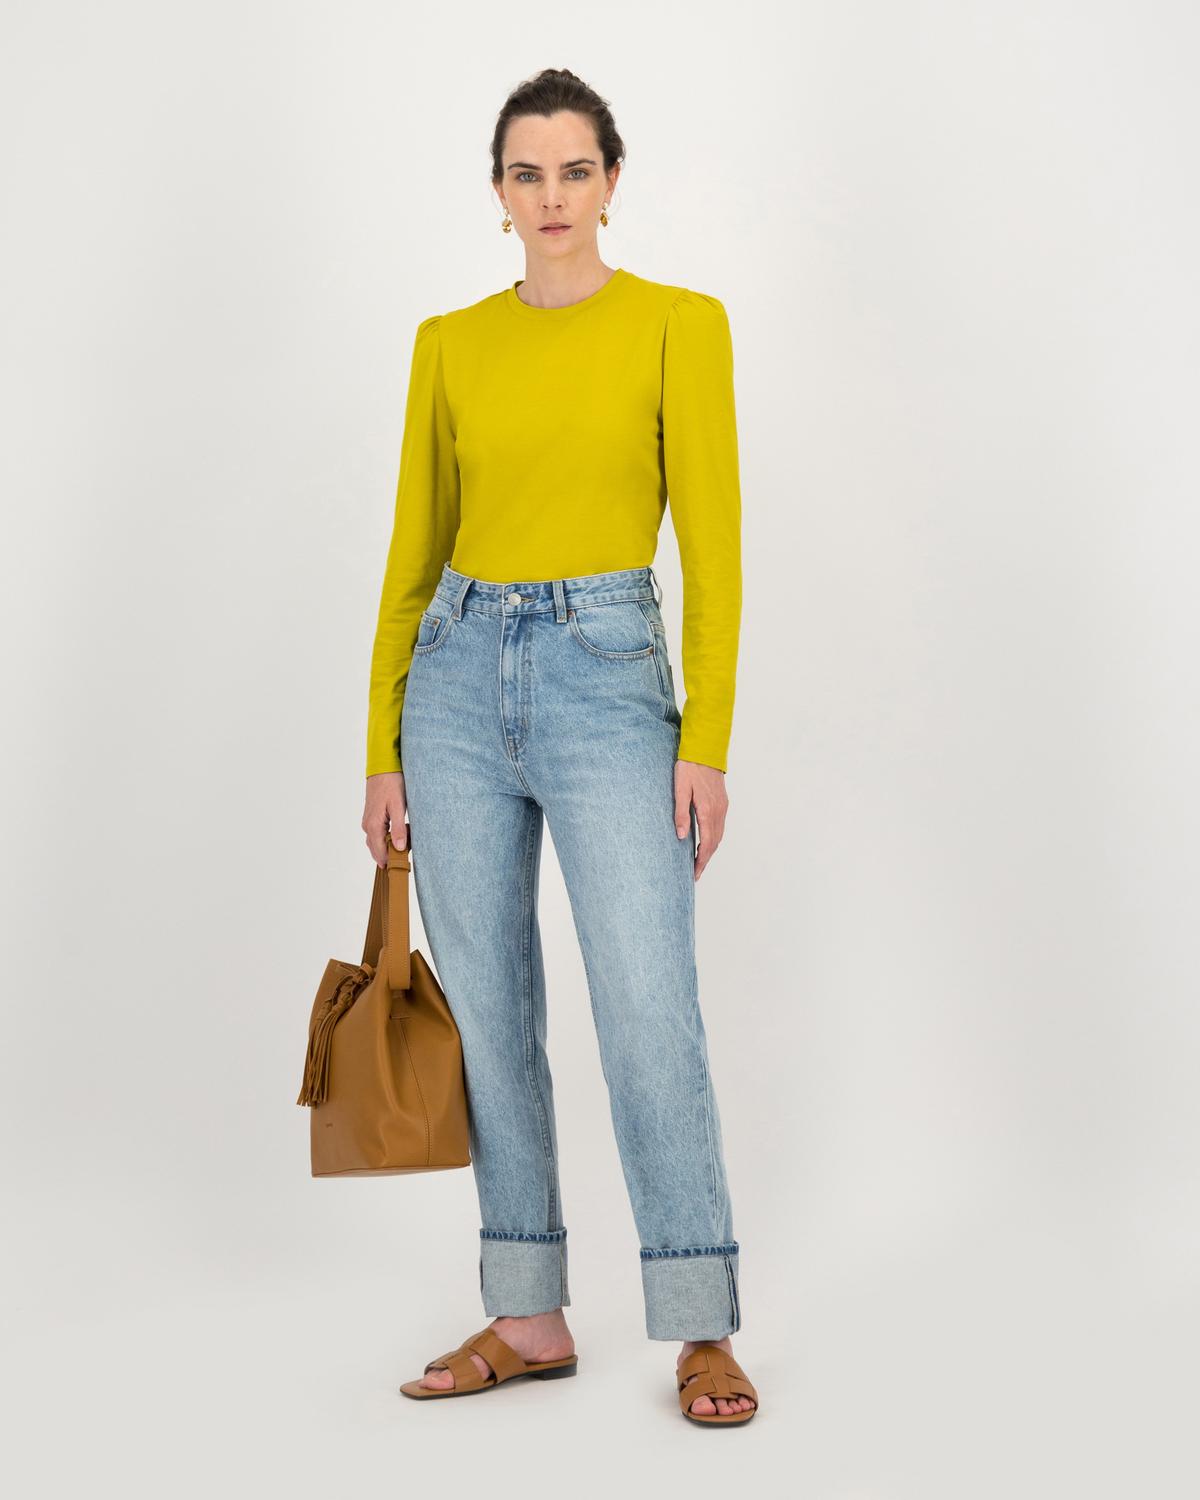 Thelma Puff Sleeve Top -  Chartreuse